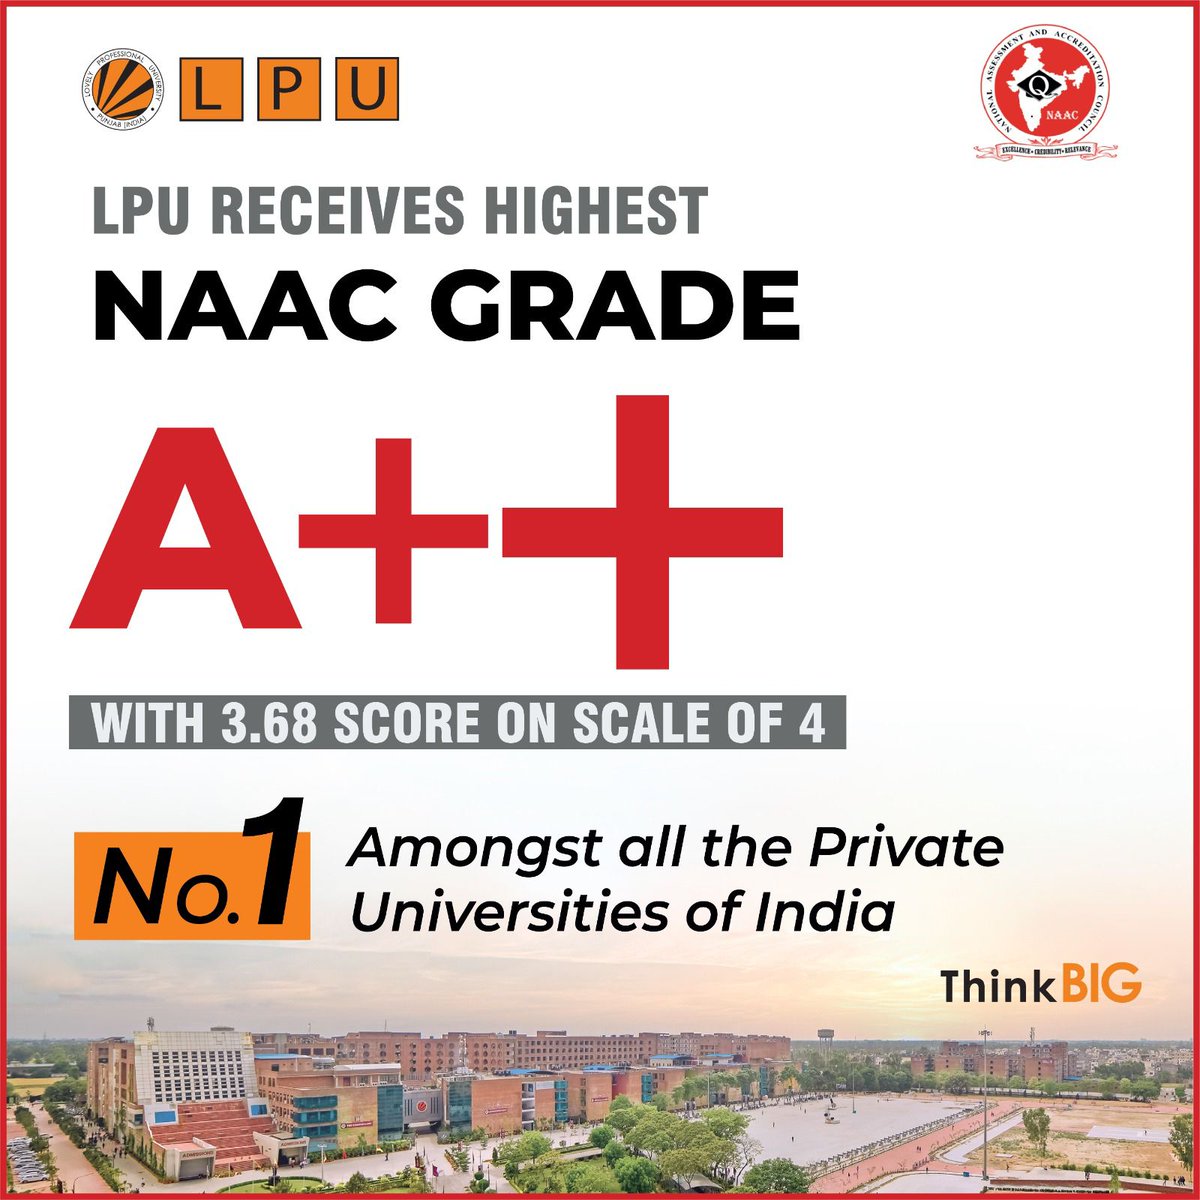 With tremendous satisfaction and joy we share that Lovely professional University has been awarded the highly sought-after NAAC Accreditation Grade A ++

#lpudesign #lpuuniversity #lpudiaries #lpuachievebig #proudvertos #leadinguniversityinIndia #bestuniversitycampus #thinkbig